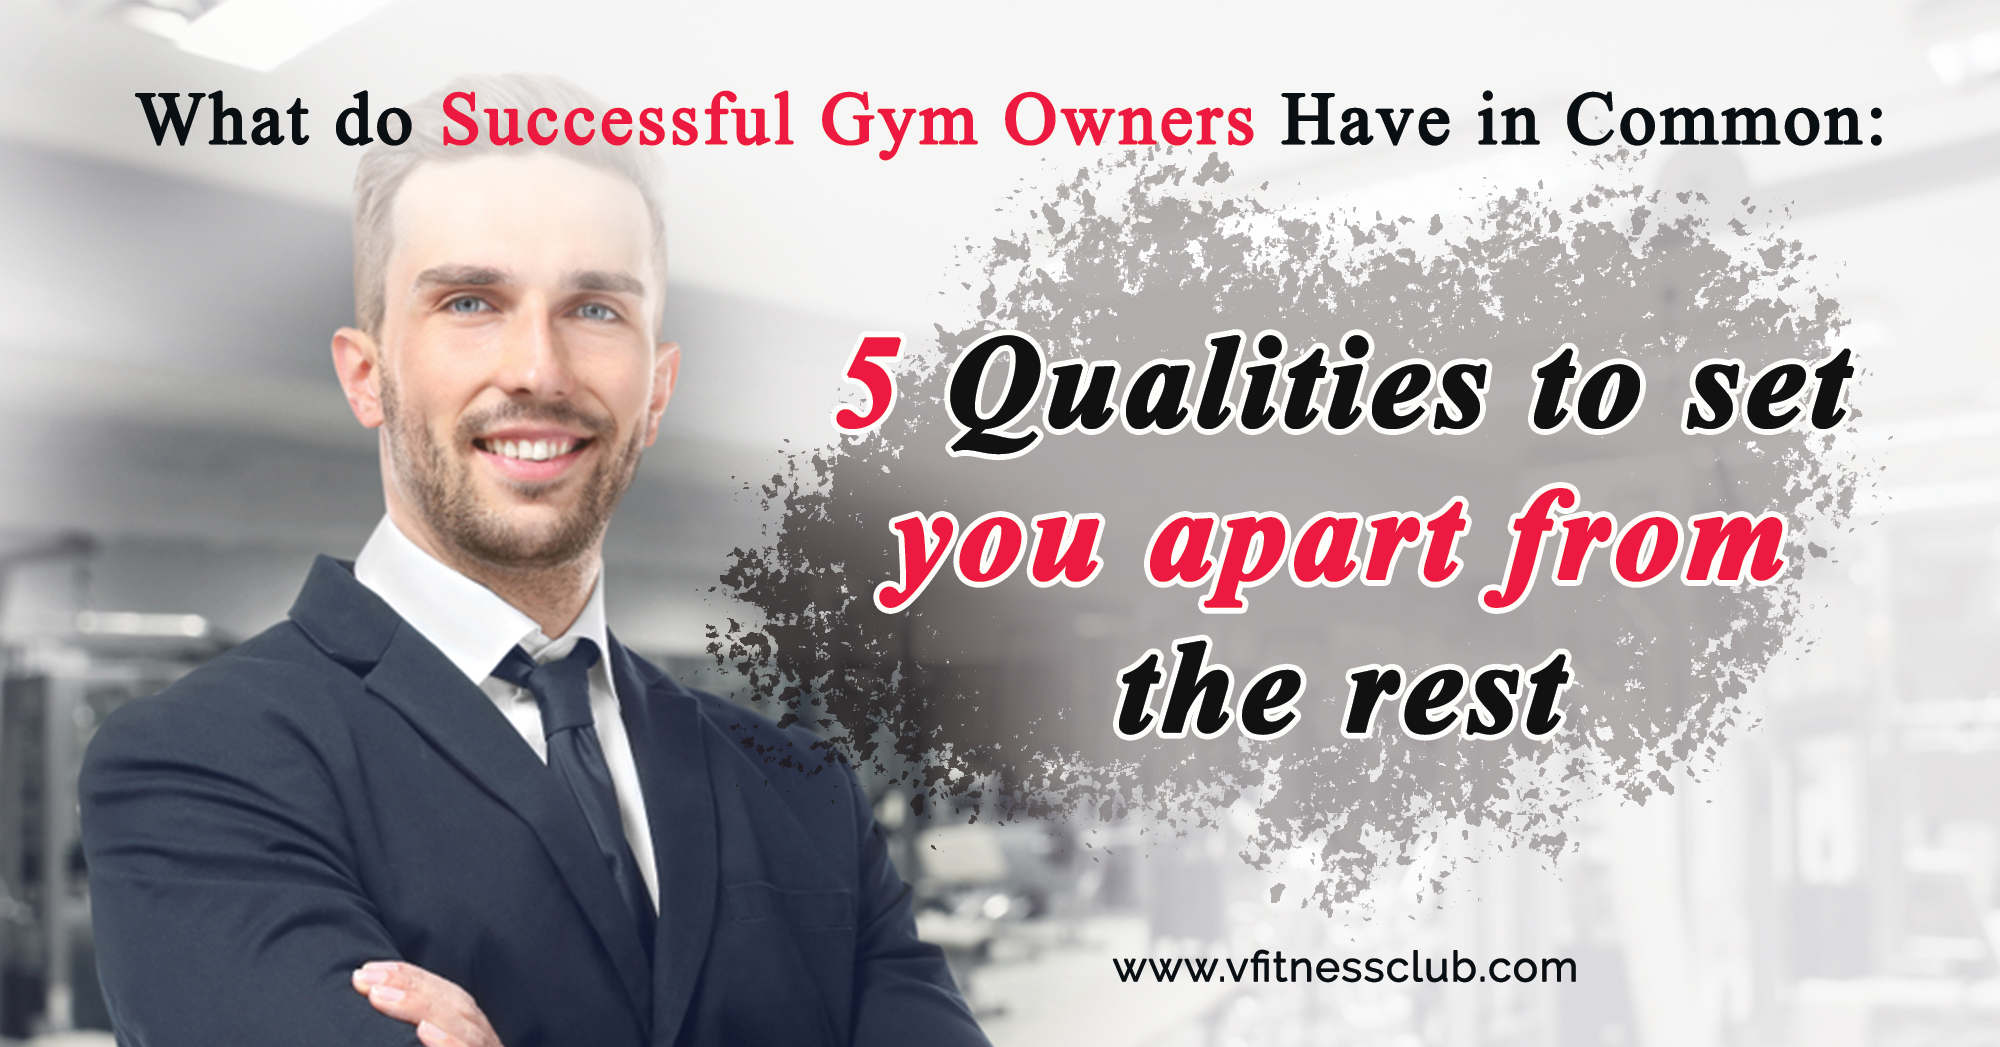 What do Successful Gym Owners Have in Common: 5 Qualities to set you apart from the rest